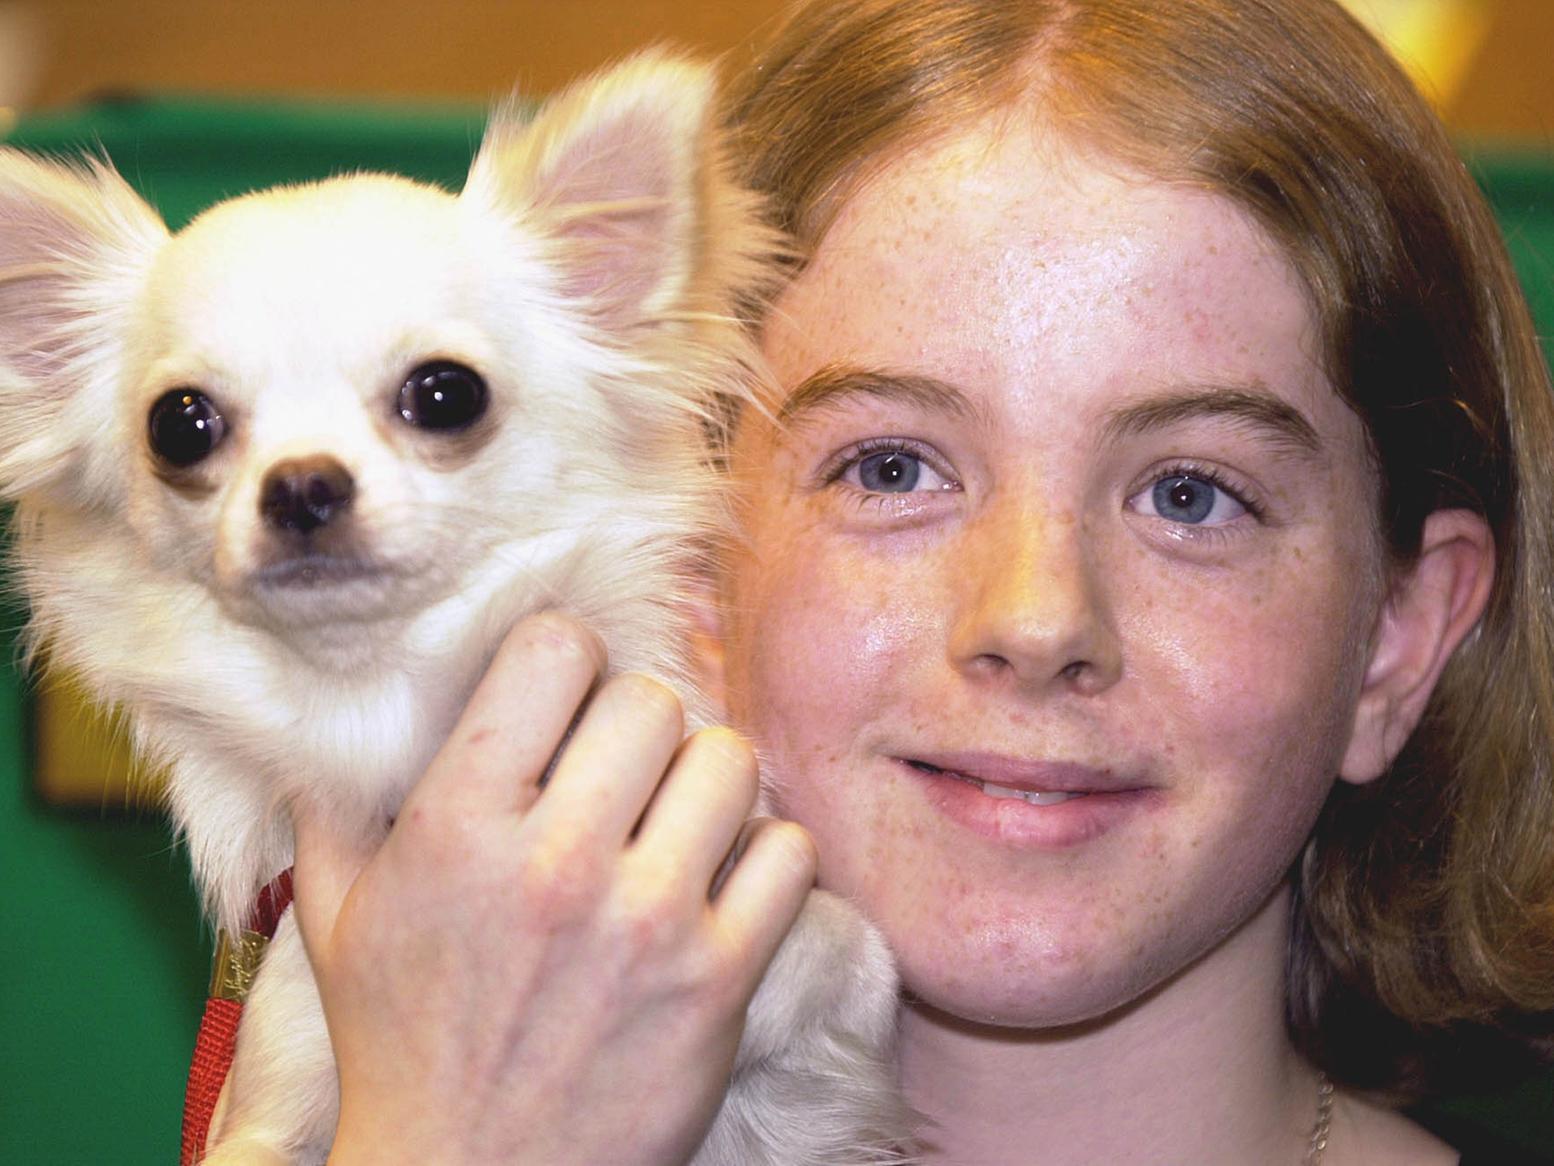 Shauna the Chihuahua with Rebecca Hargeaves of Leeds after competing at Crufts.